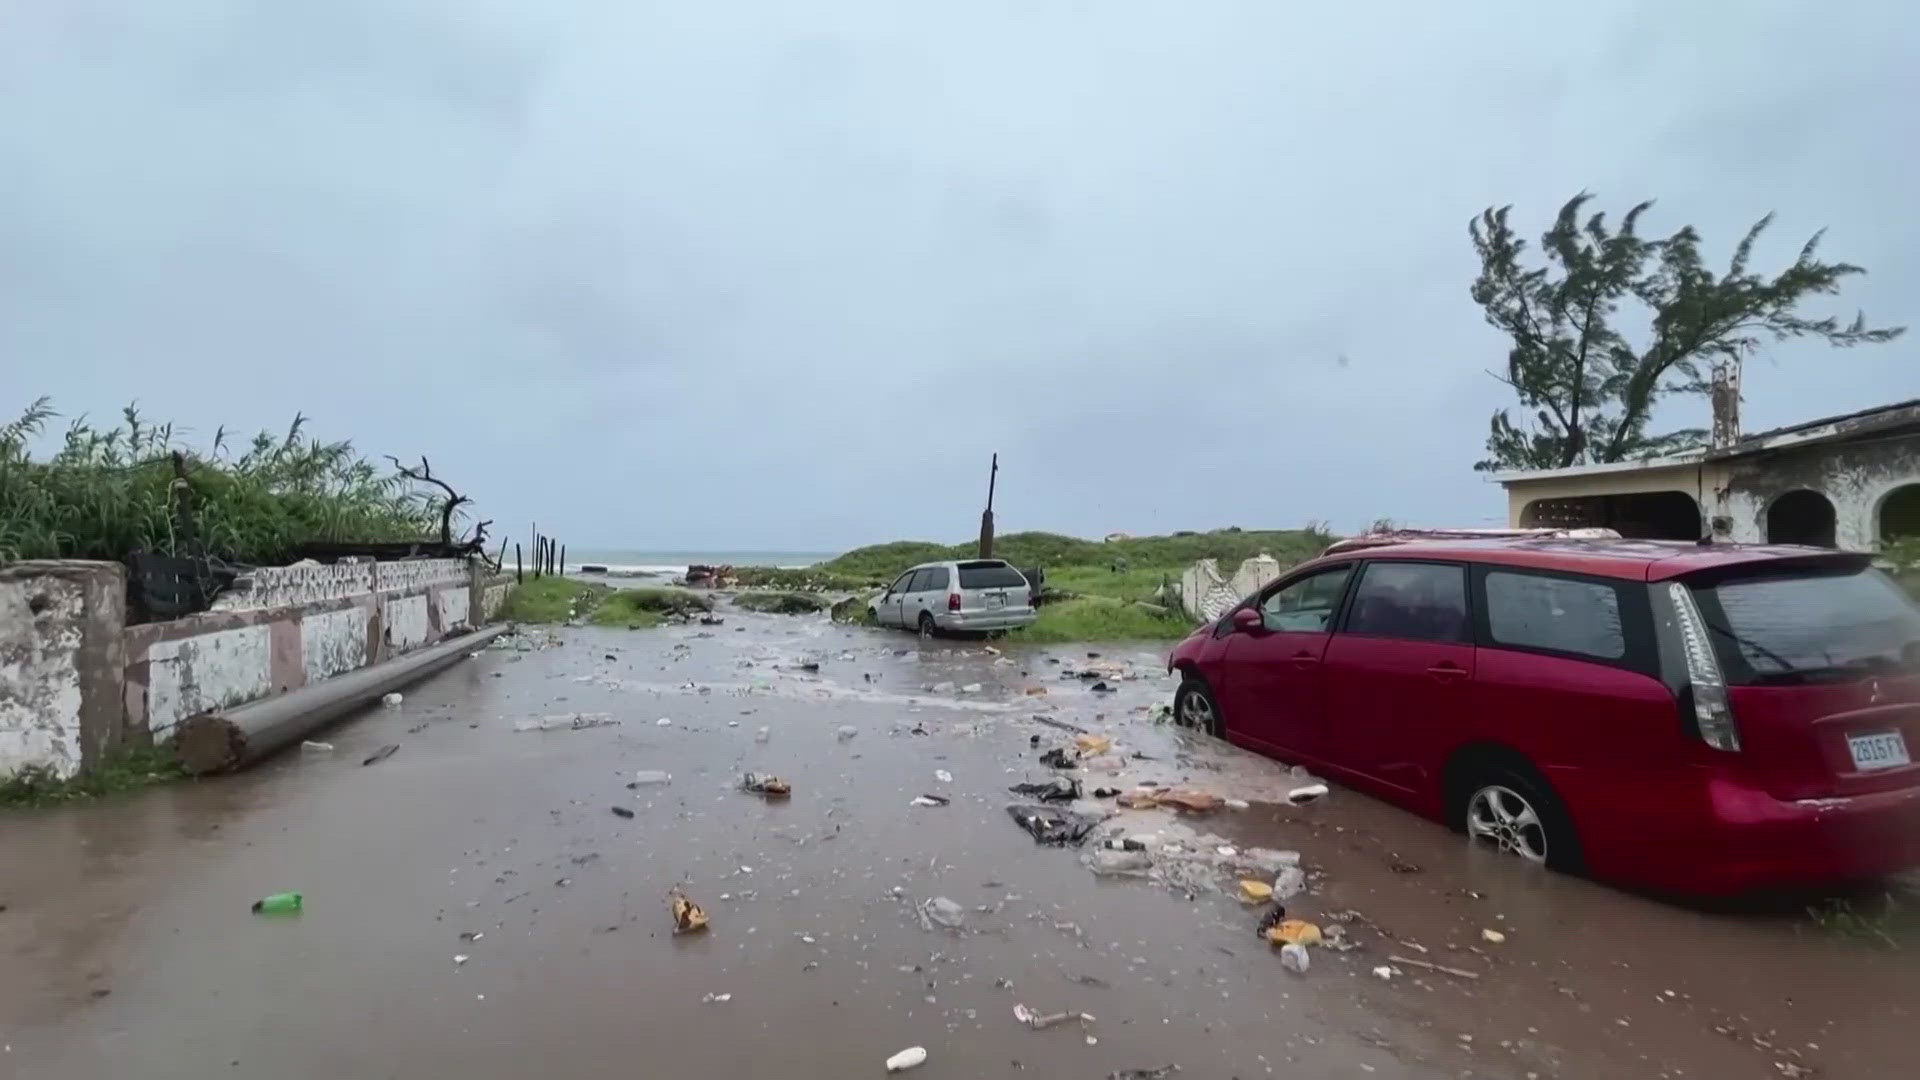 Video out of Jamaica shows damaged roofs, downed power lines and trees that have been uprooted.